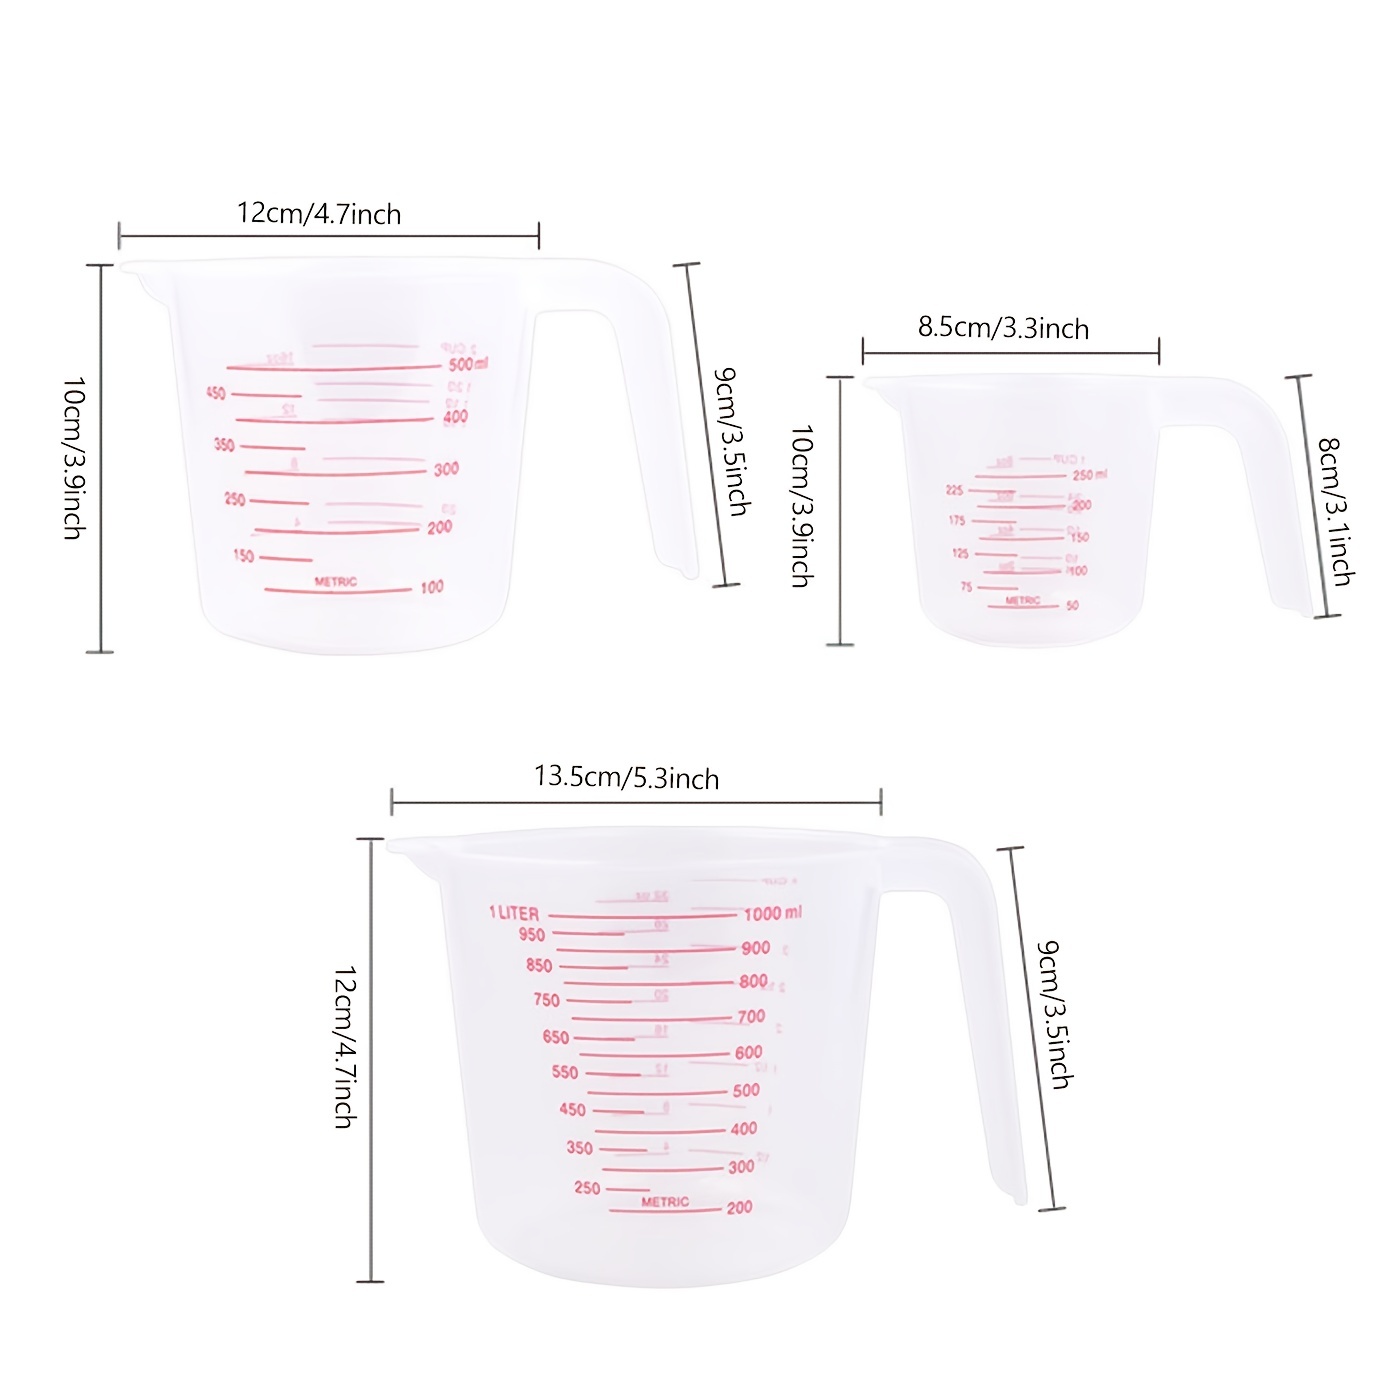 6ml Pp Dry Measuring Cup Sizes, Graduate Plastic Oral Solution Cup